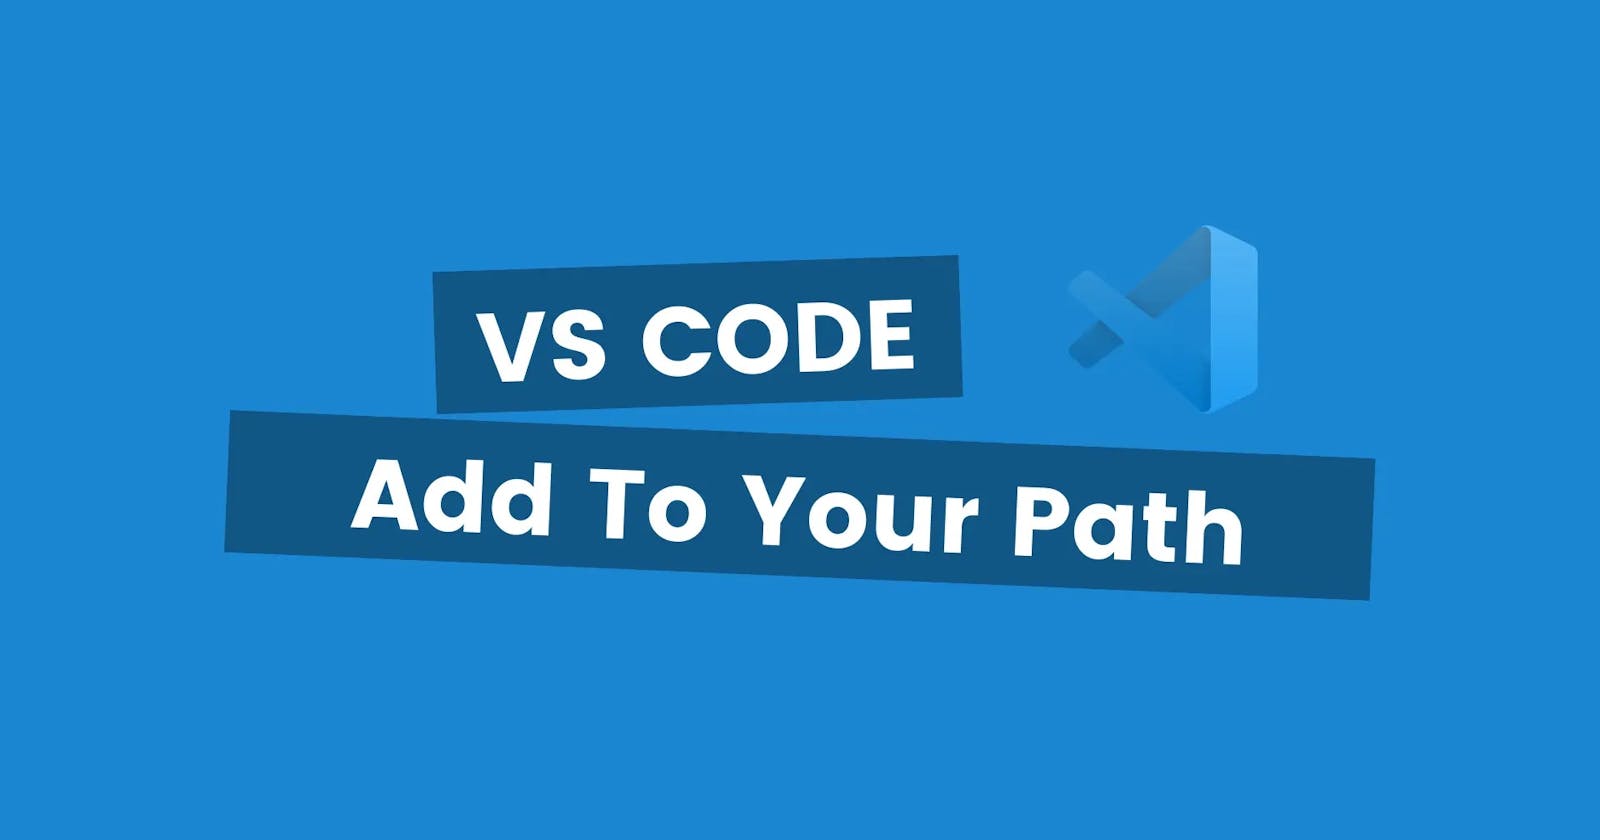 Add VS Code To Your Path